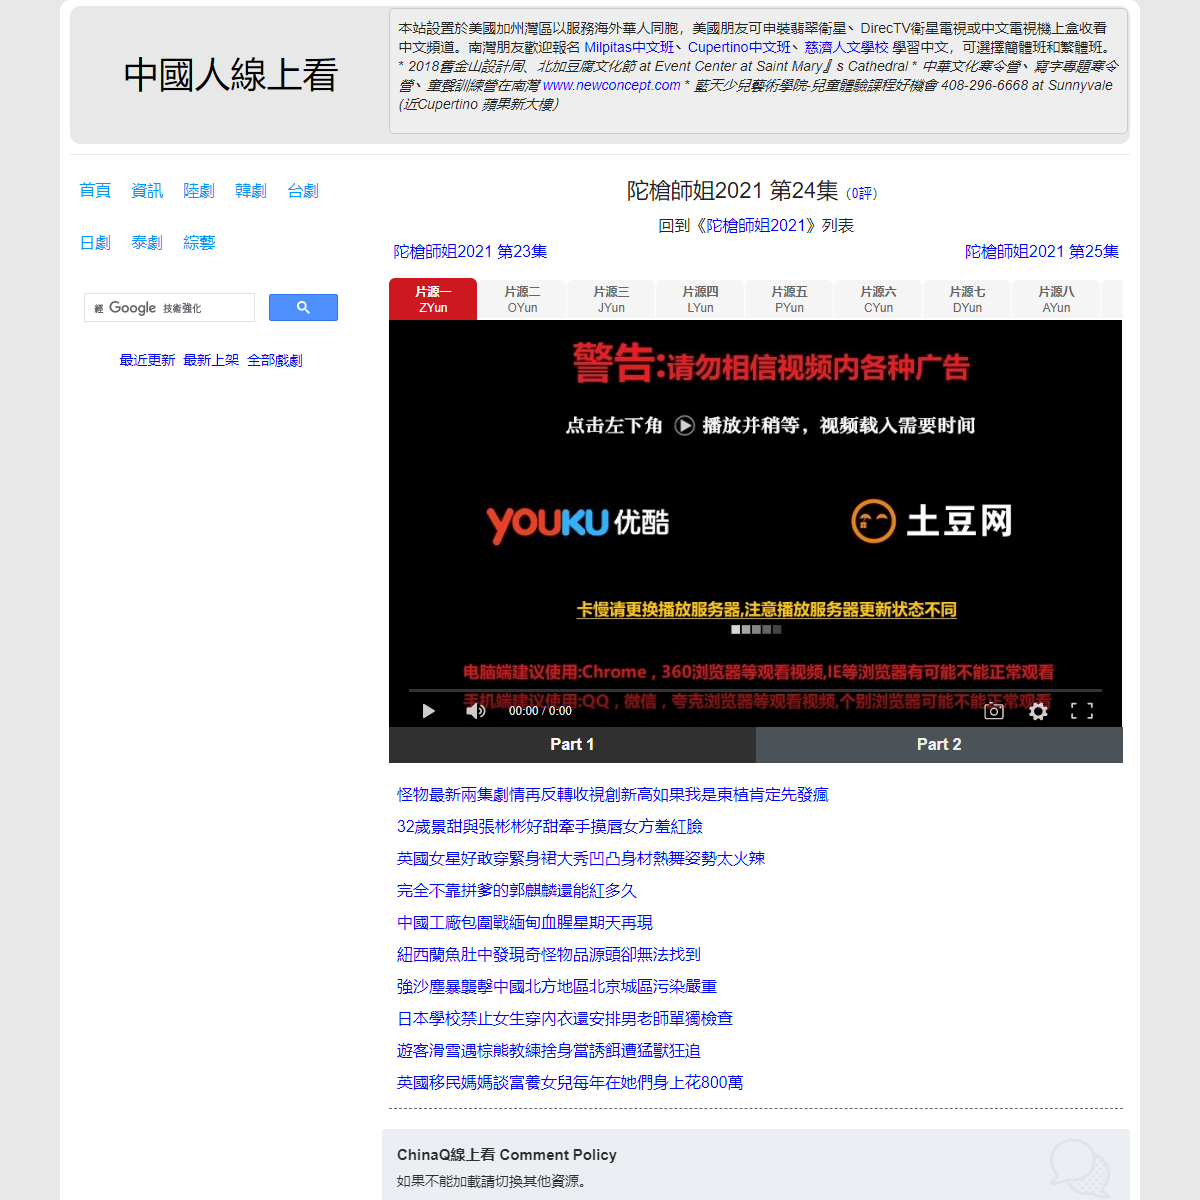 A complete backup of https://chinaq.tv/hk210125/24.html